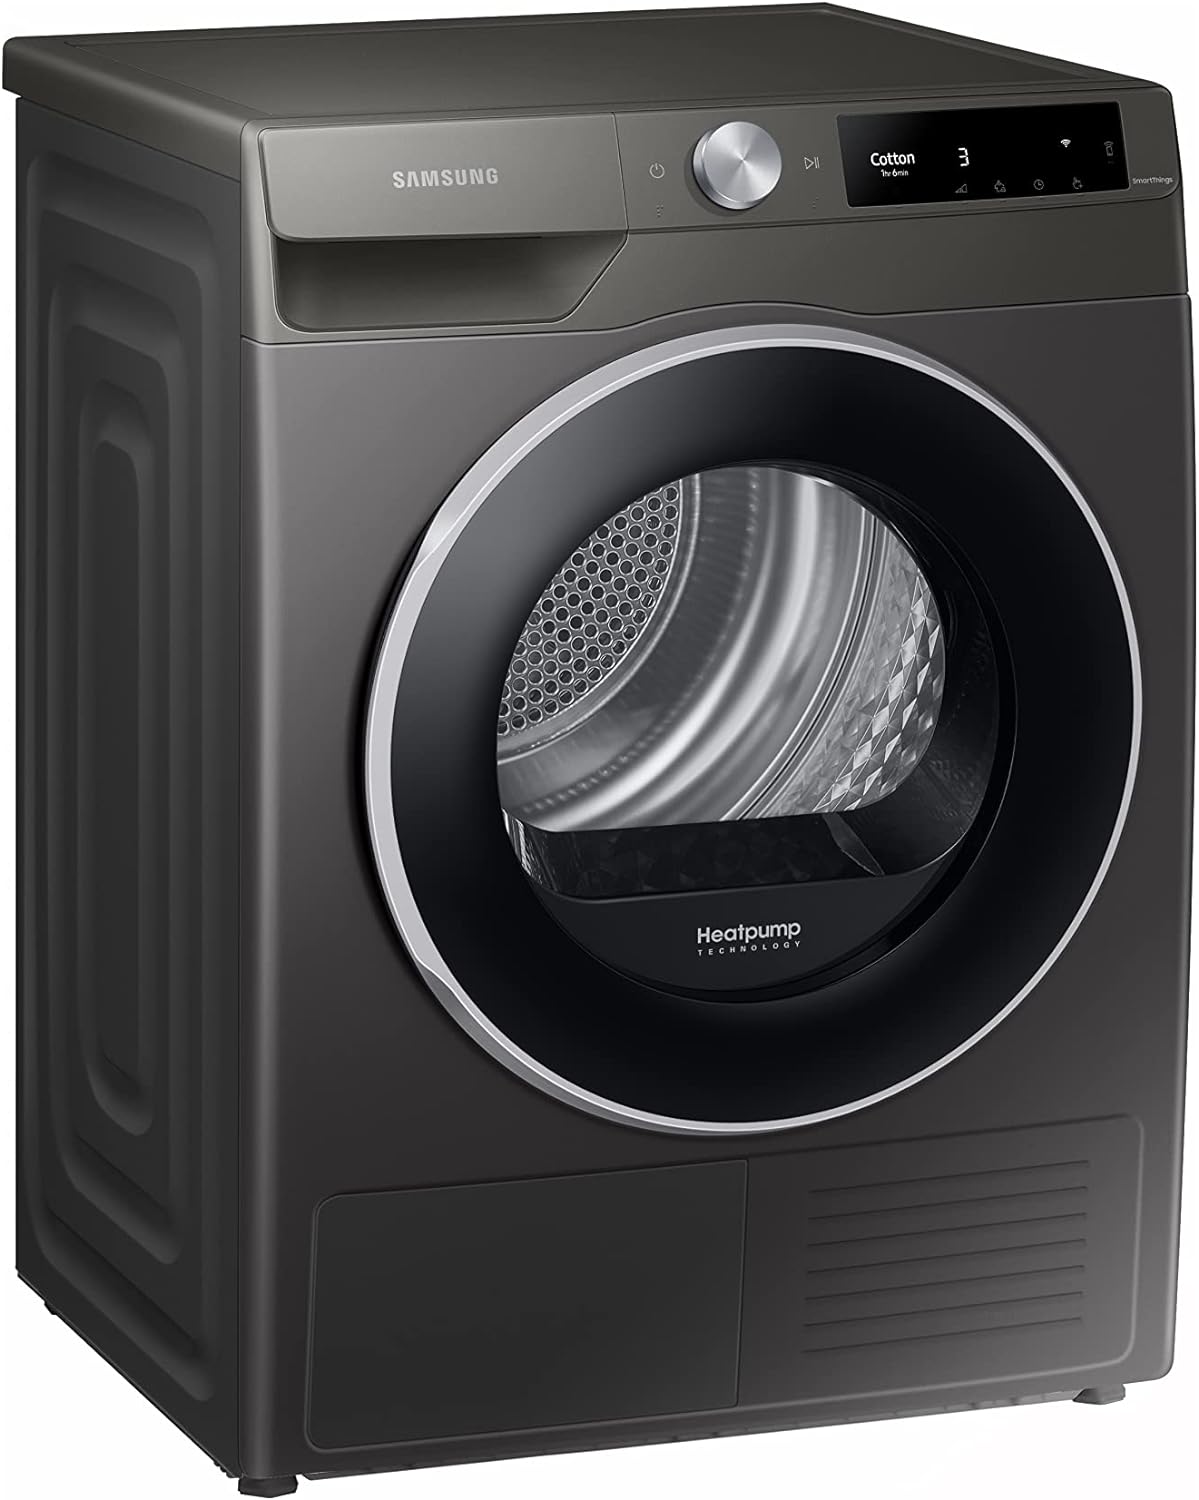 Samsung Series 6 DV90T6240LN/S1 with OptimalDry™, Freestanding Heat Pump Tumble Dryer, 9 kg, Graphite, A+++ Rated - Amazing Gadgets Outlet